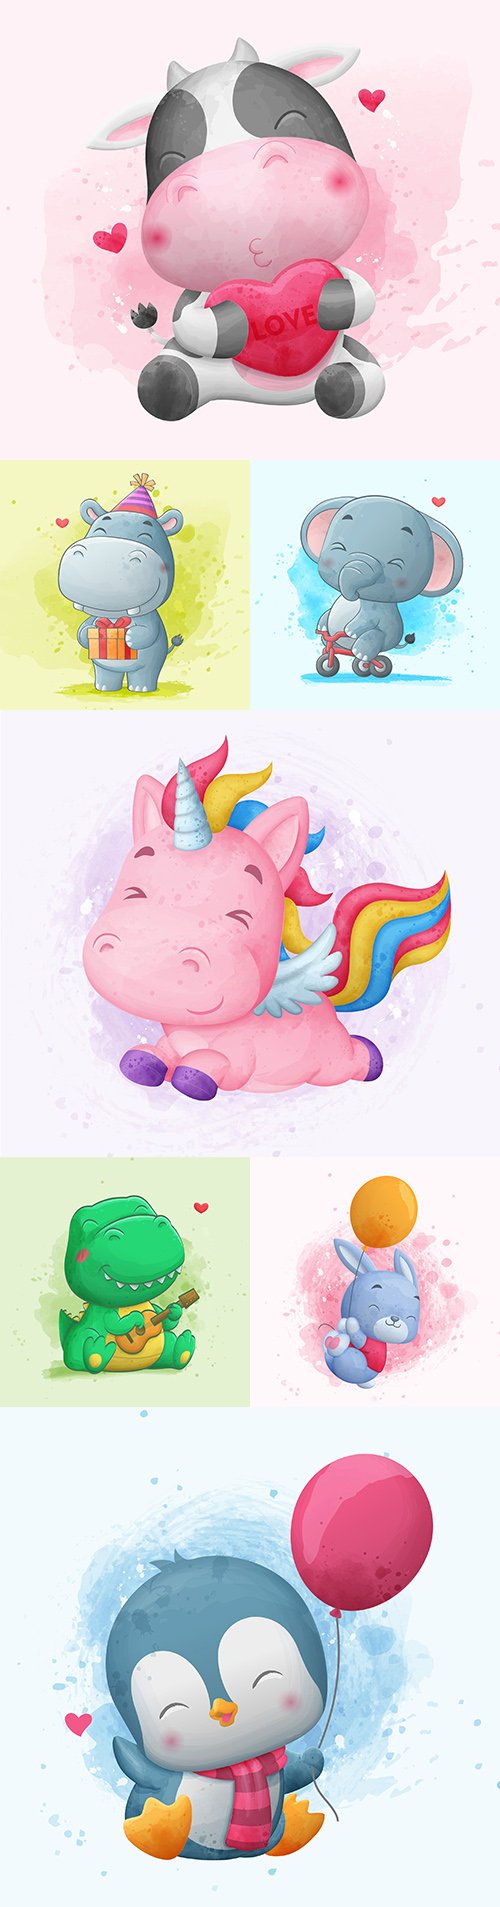 Watercolor illustrations cute cartoon animals with balloons